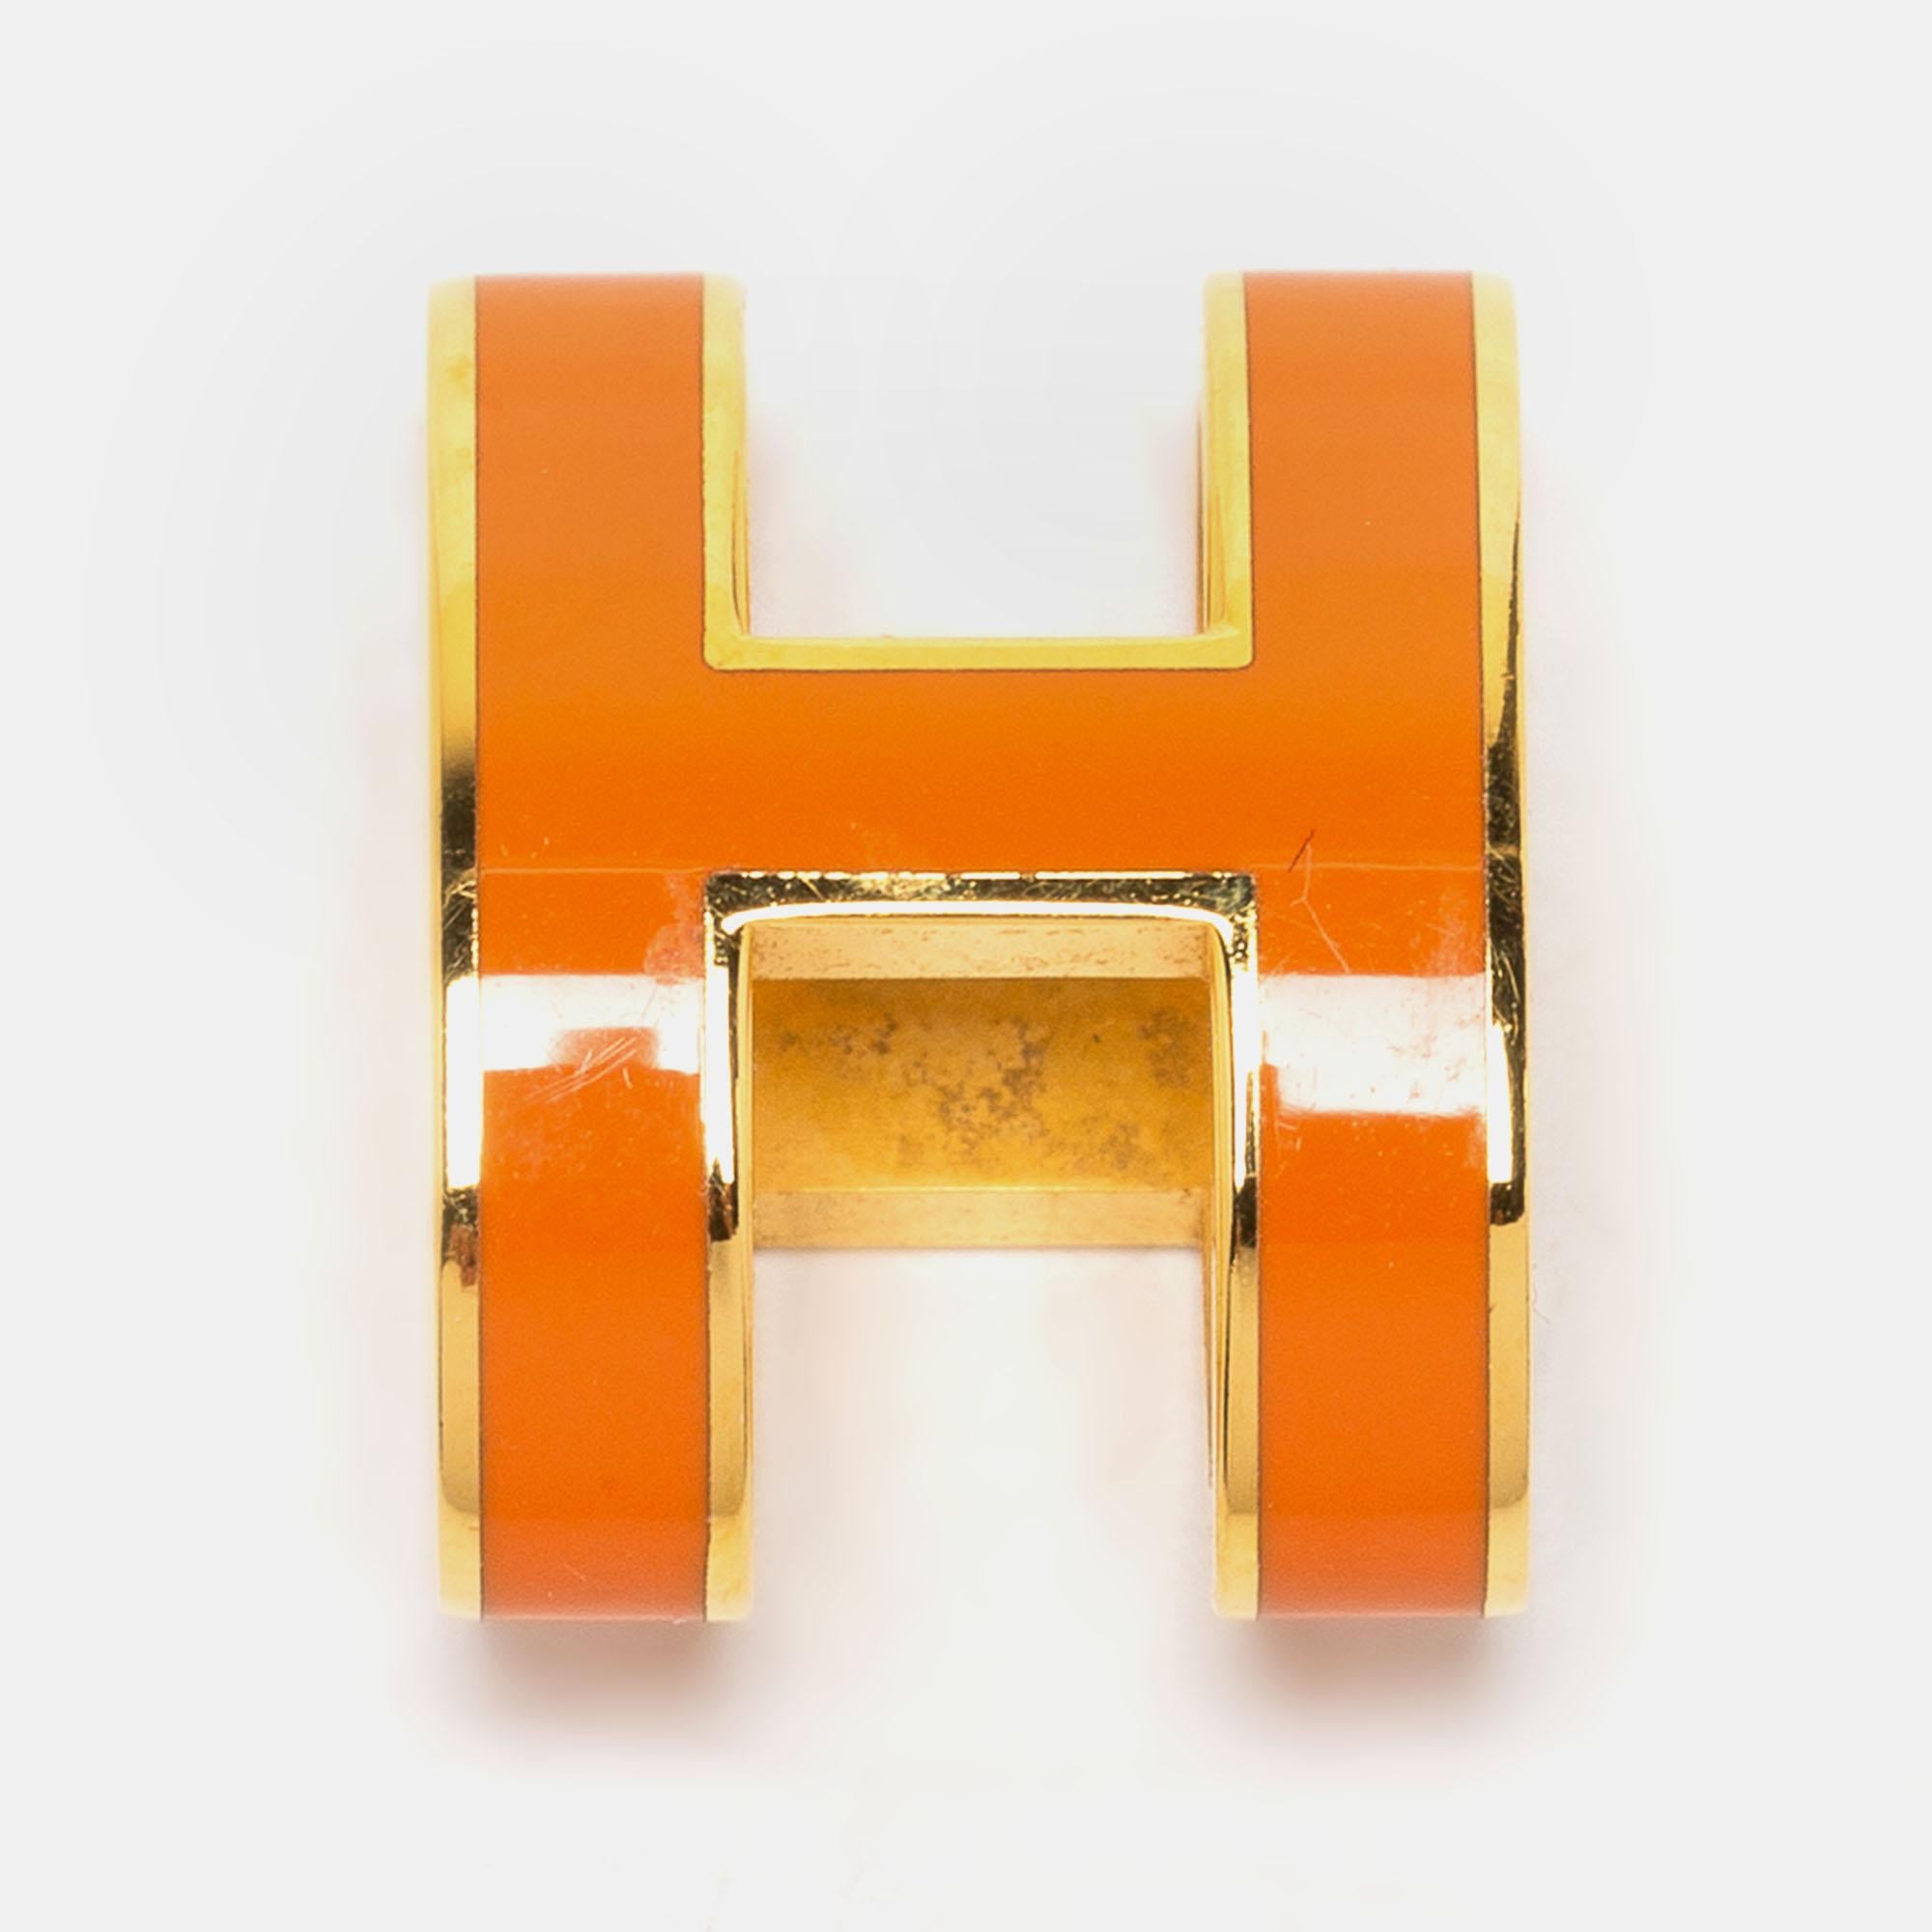 This stunning gold-plated pendant by Hermès is minimal and effortlessly stylish to pair with any outfit. Set in a signature logo H-shape tinted with orange enamel, this Pop H piece is a practical and simple piece that can be worn on any day!

